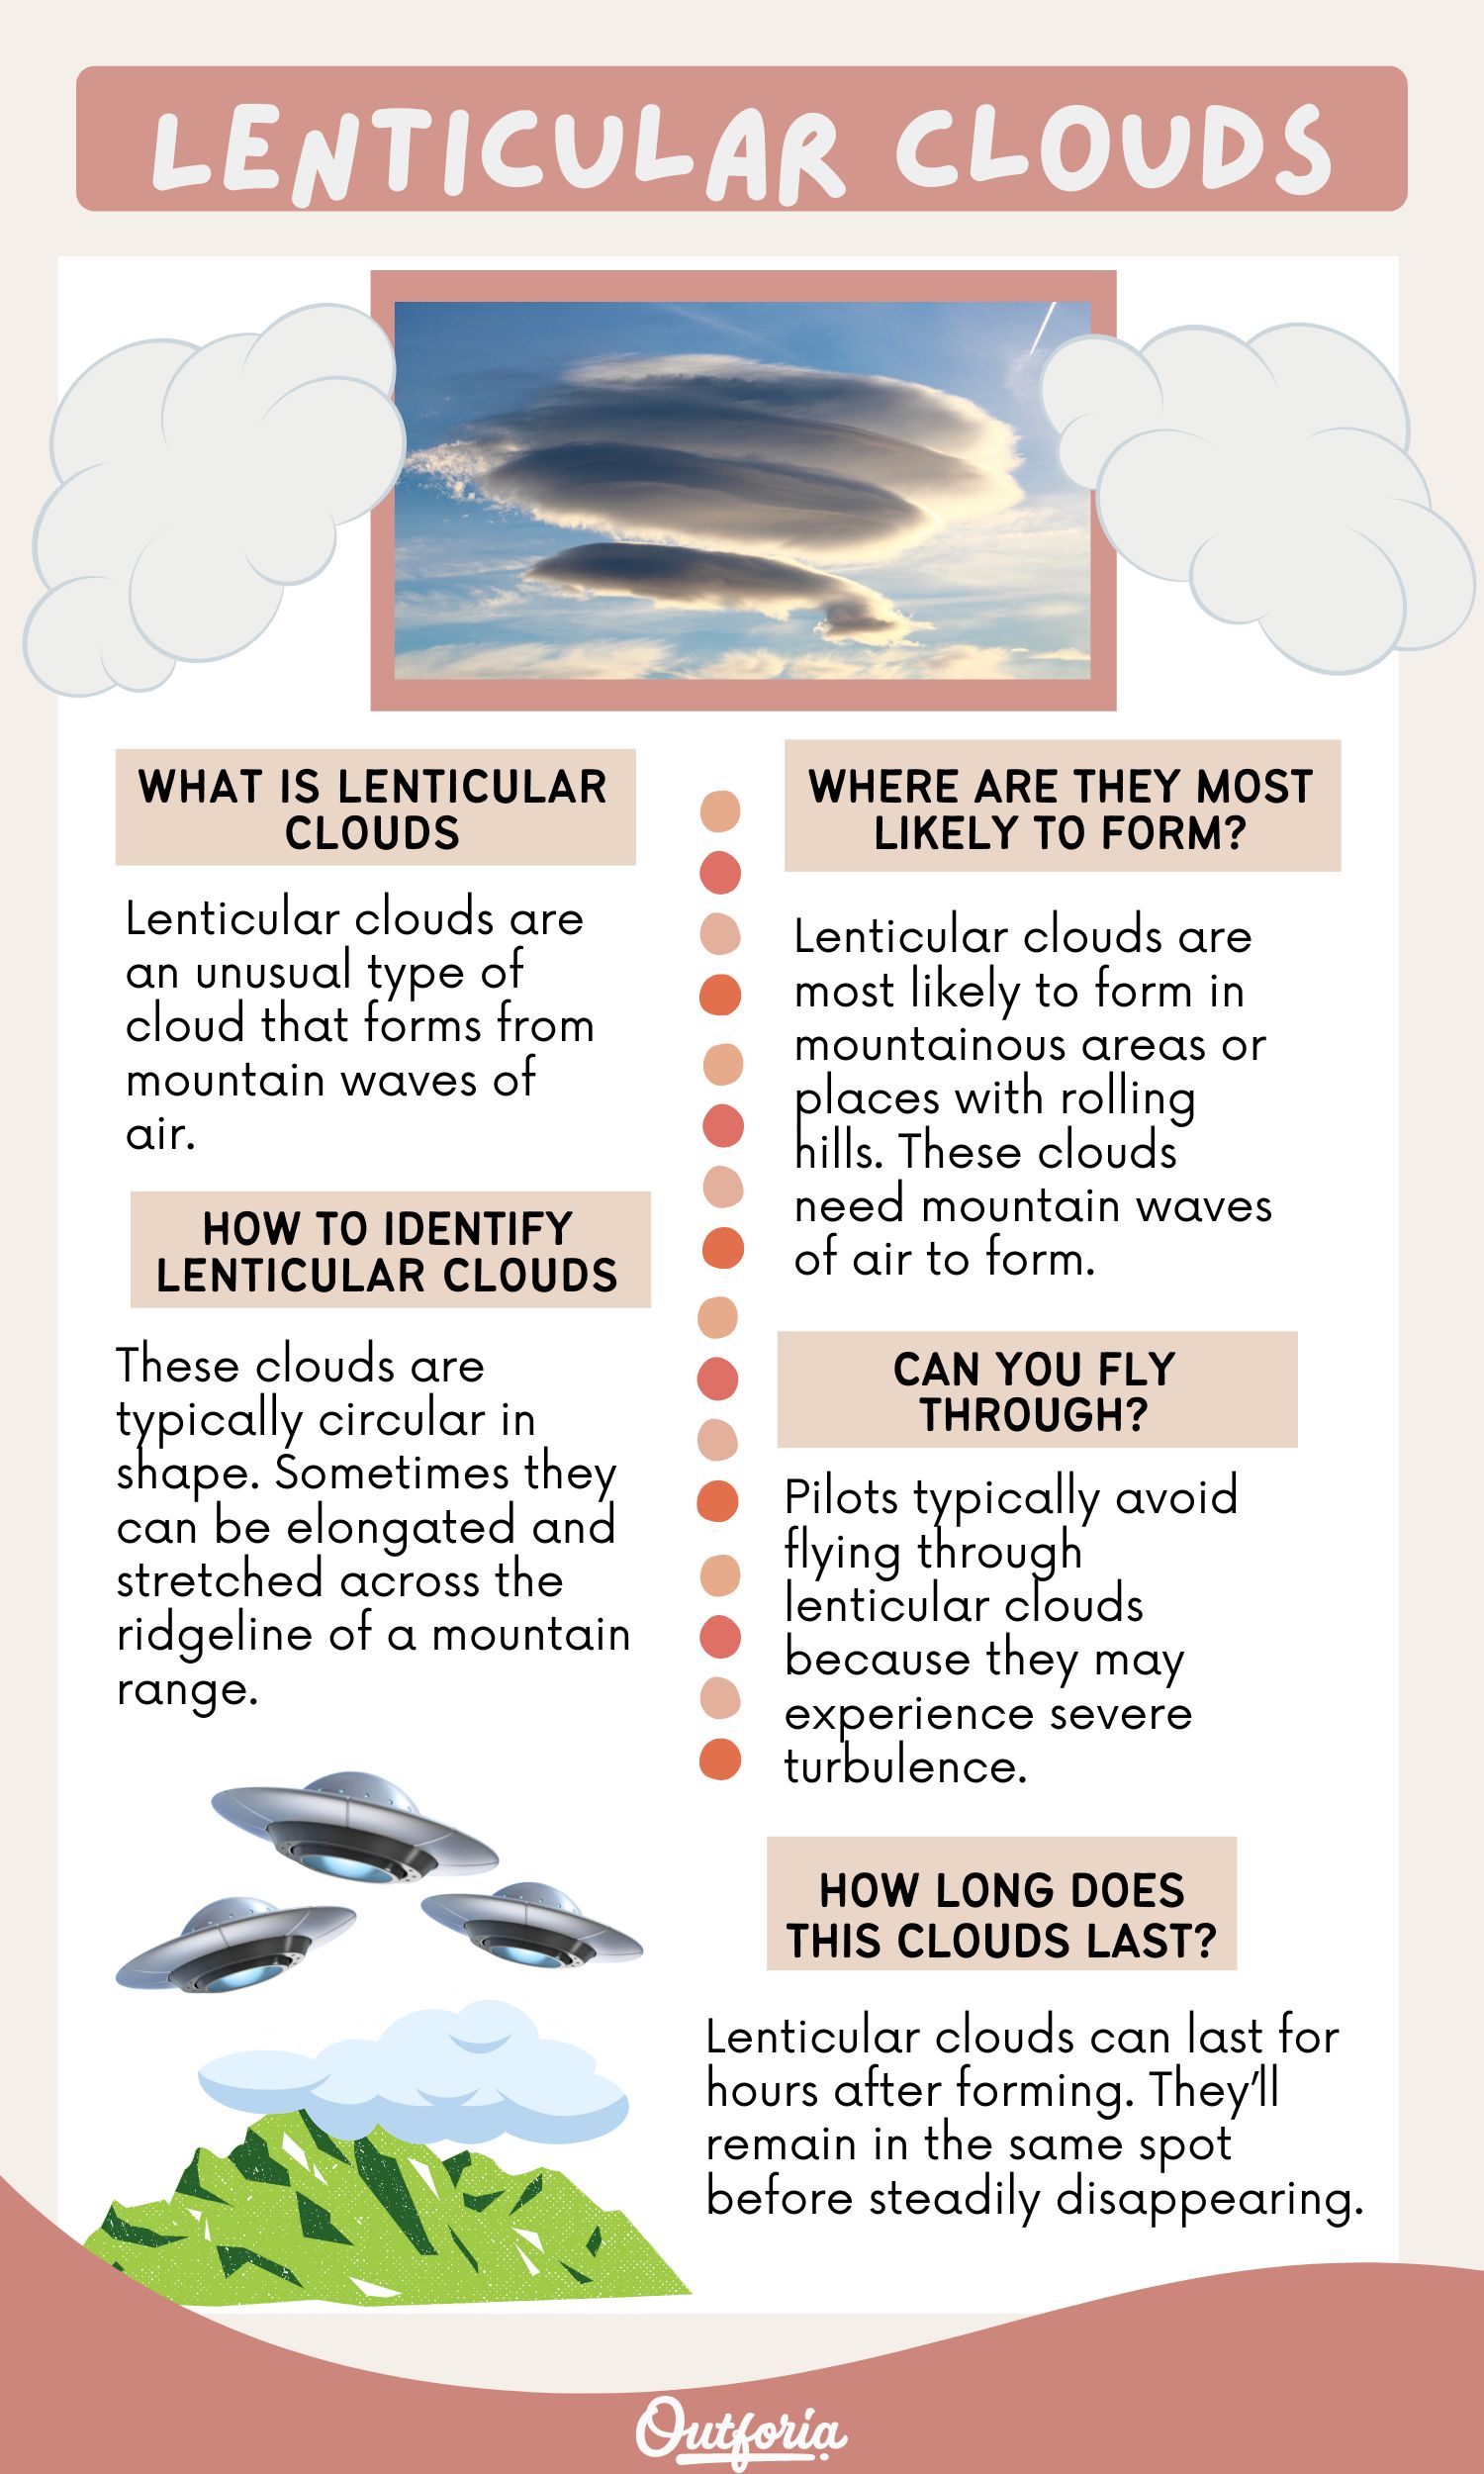 Chart of lenticular clouds complete with facts, photos, and more